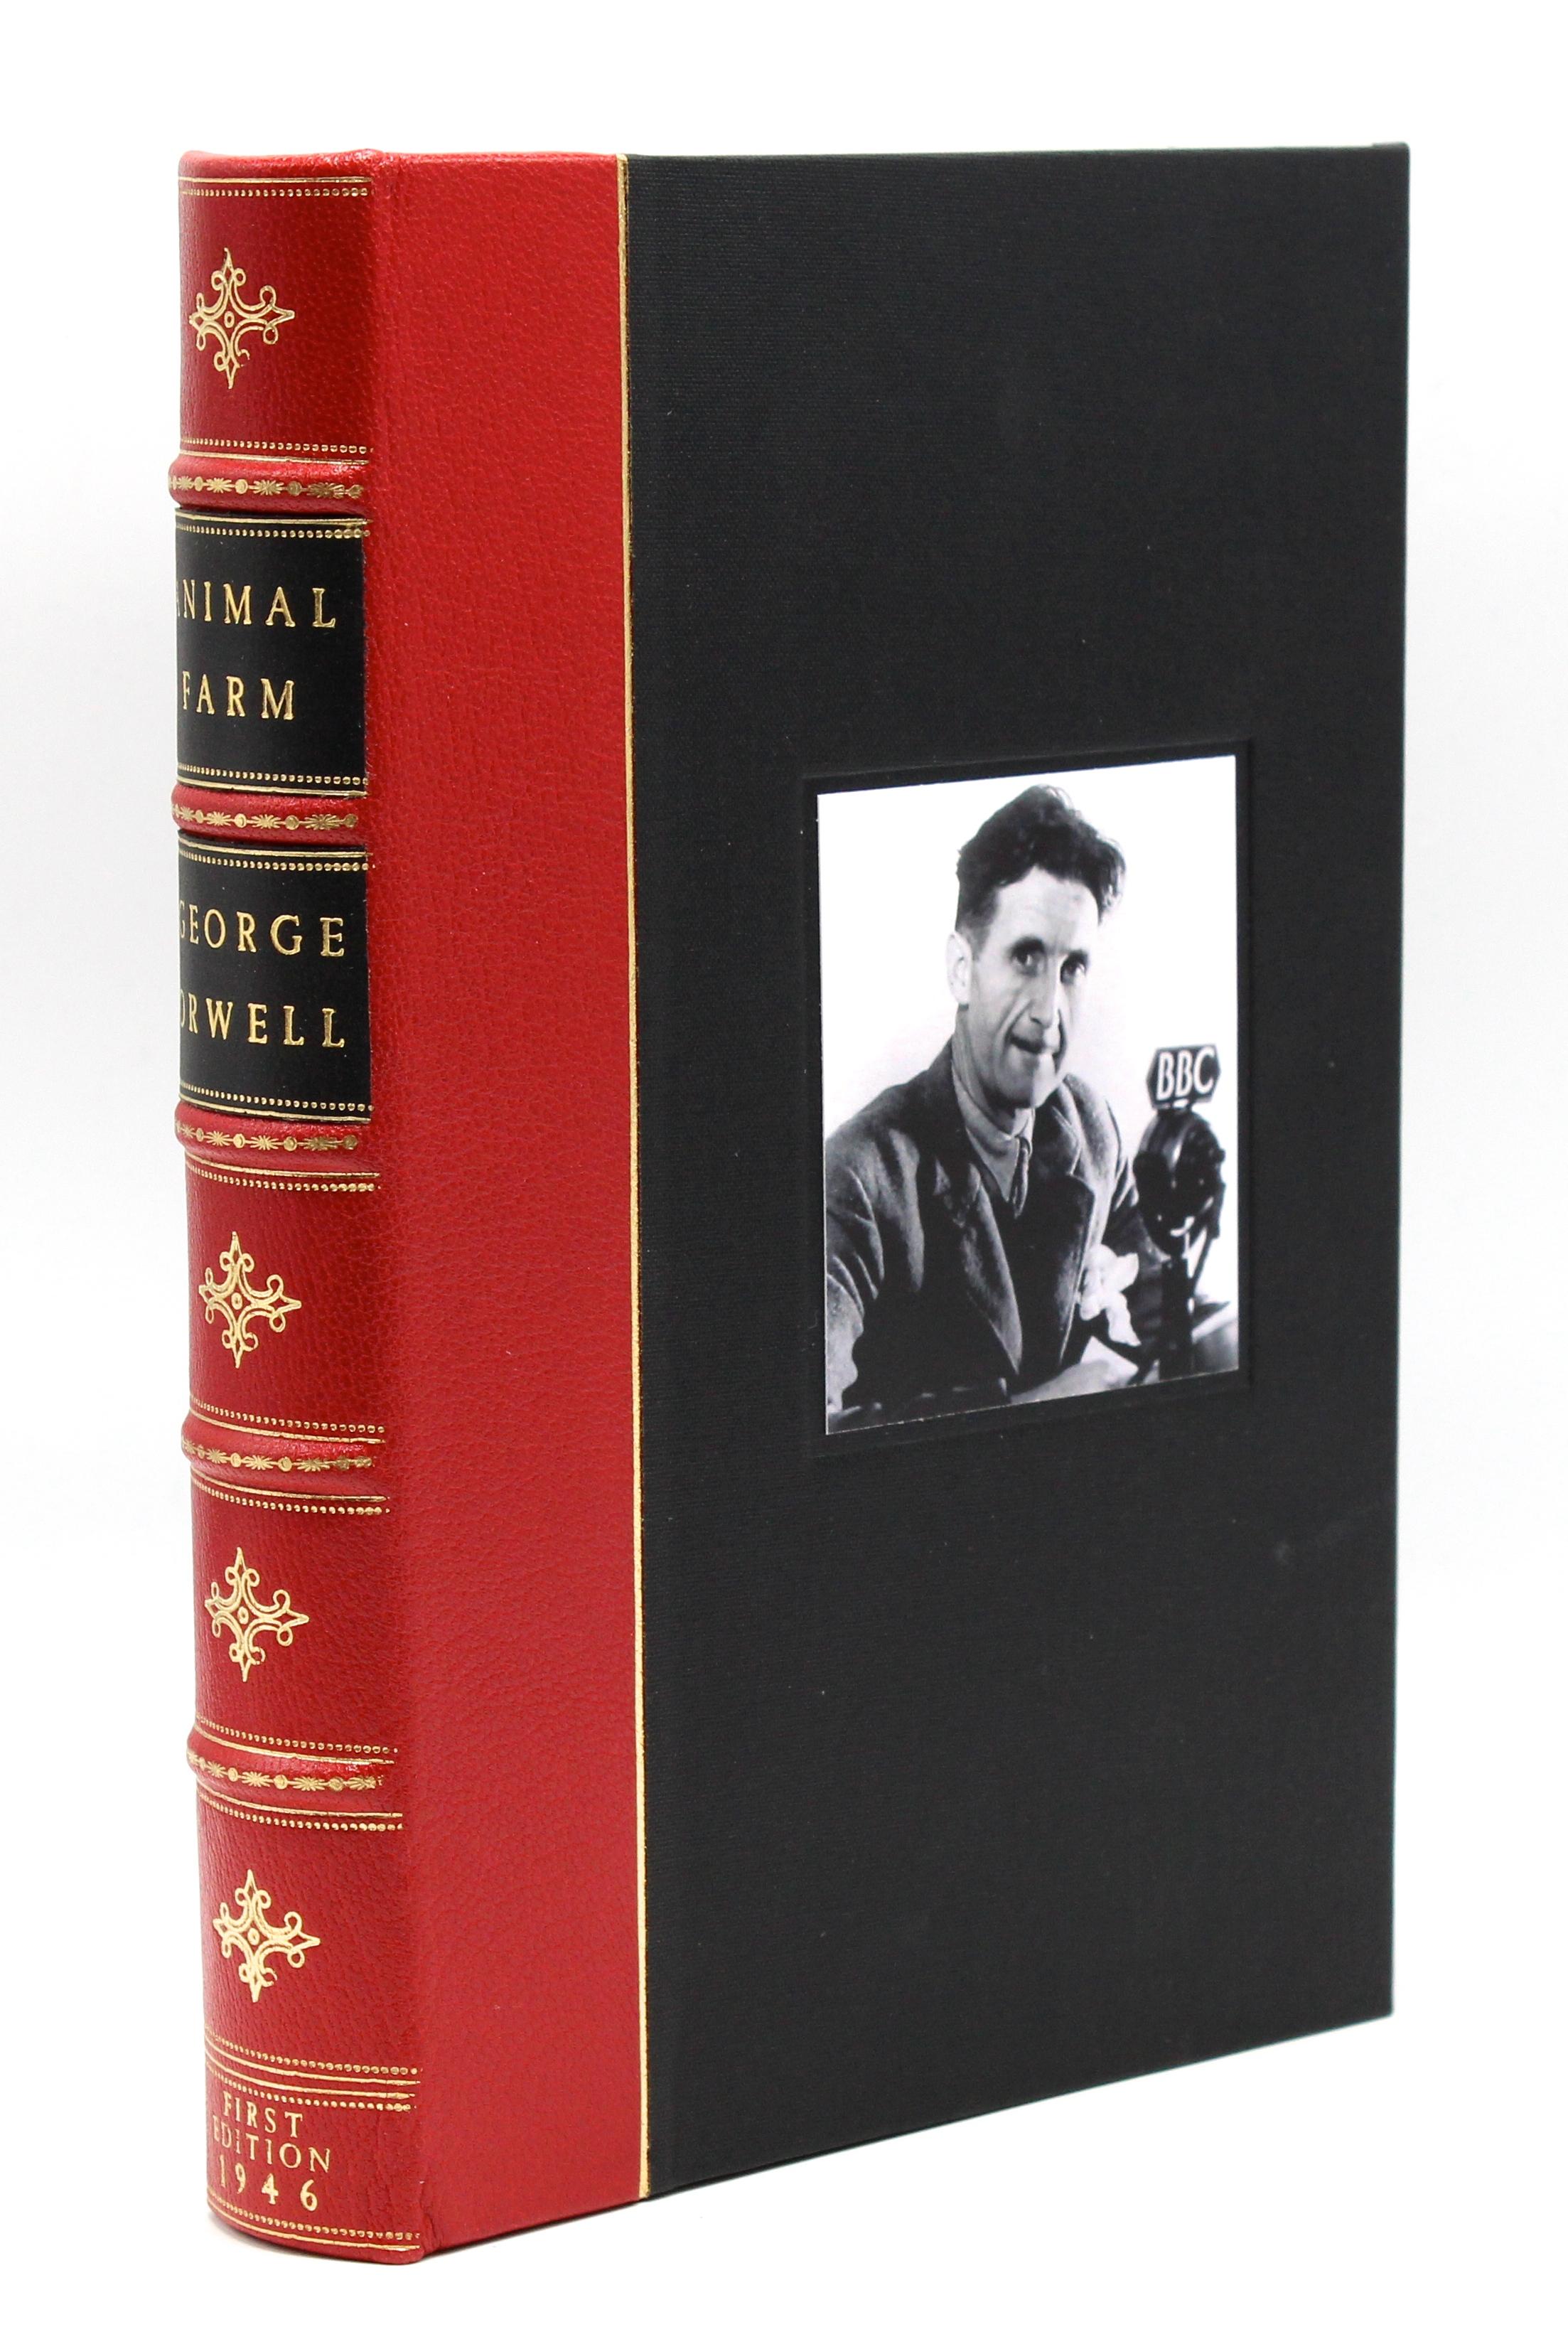 Orwell, George. Animal Farm. New York: Harcourt, Brace and Co., 1946. First American edition. First issue dust jacket with mylar cover. Presented in custom clamshell.

This first American edition of Animal Farm features the original 1946 dust jacket